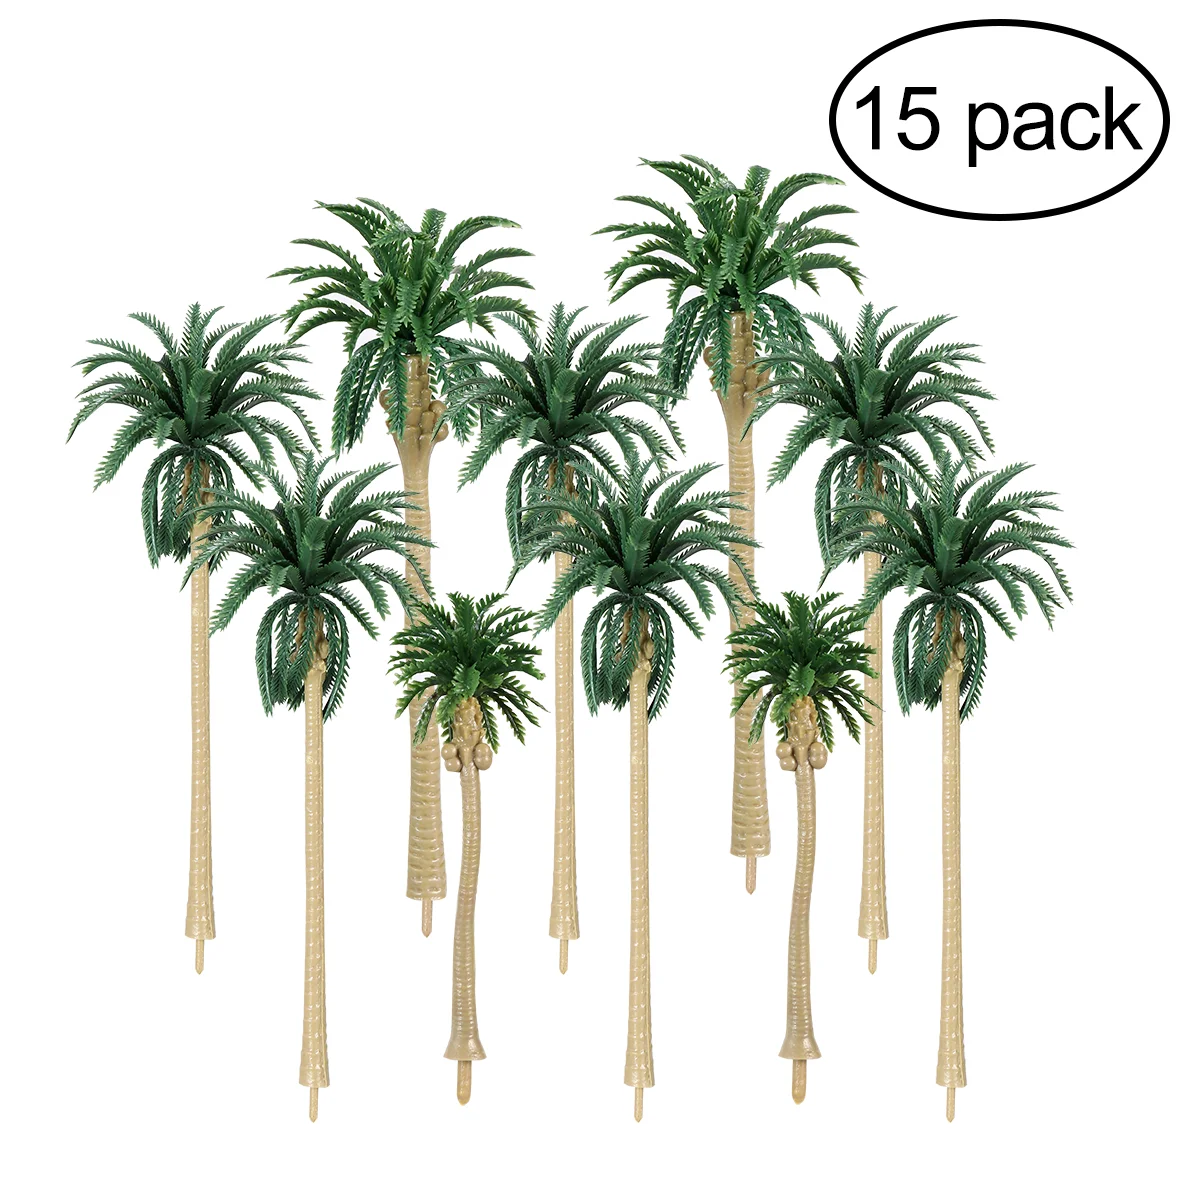 

Scenery Model Coconut Palm Trees Artificial Plant Simulation Coconut Tree Sand Table Model Props Home Decor